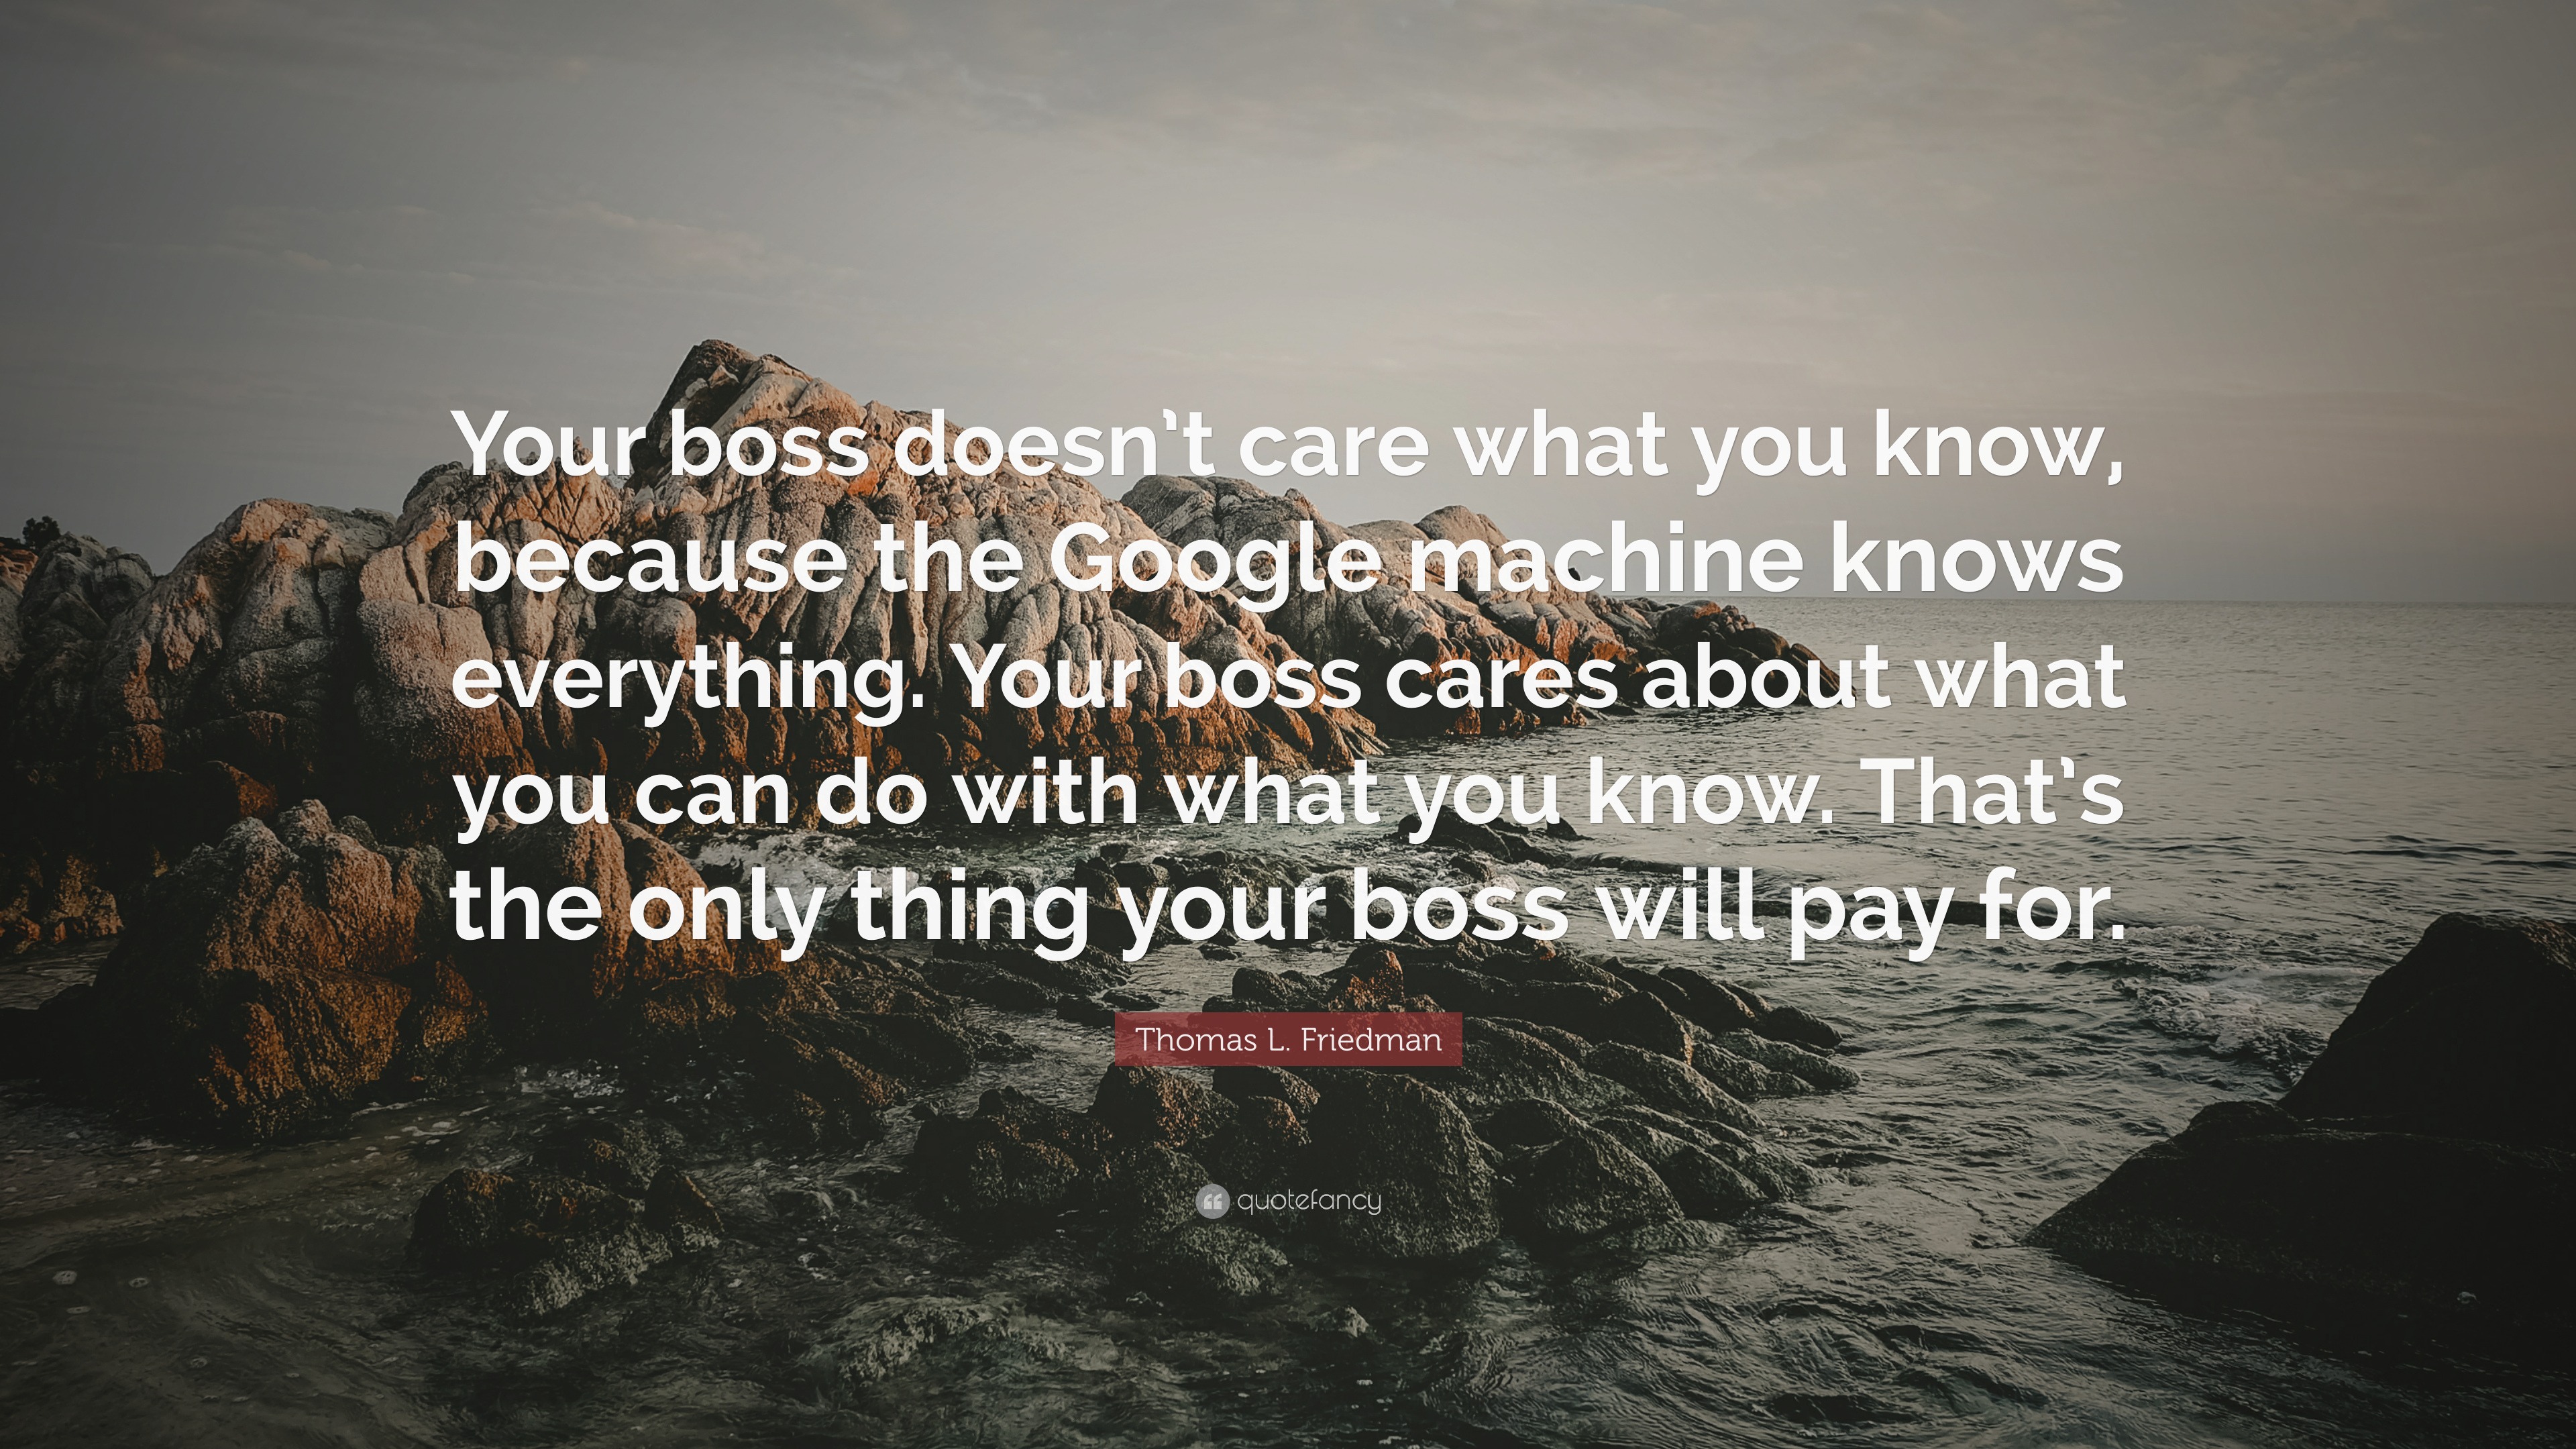 Thomas L Friedman Quote Your Boss Doesn T Care What You Know Because The Google Machine Knows Everything Your Boss Cares About What You Can Do